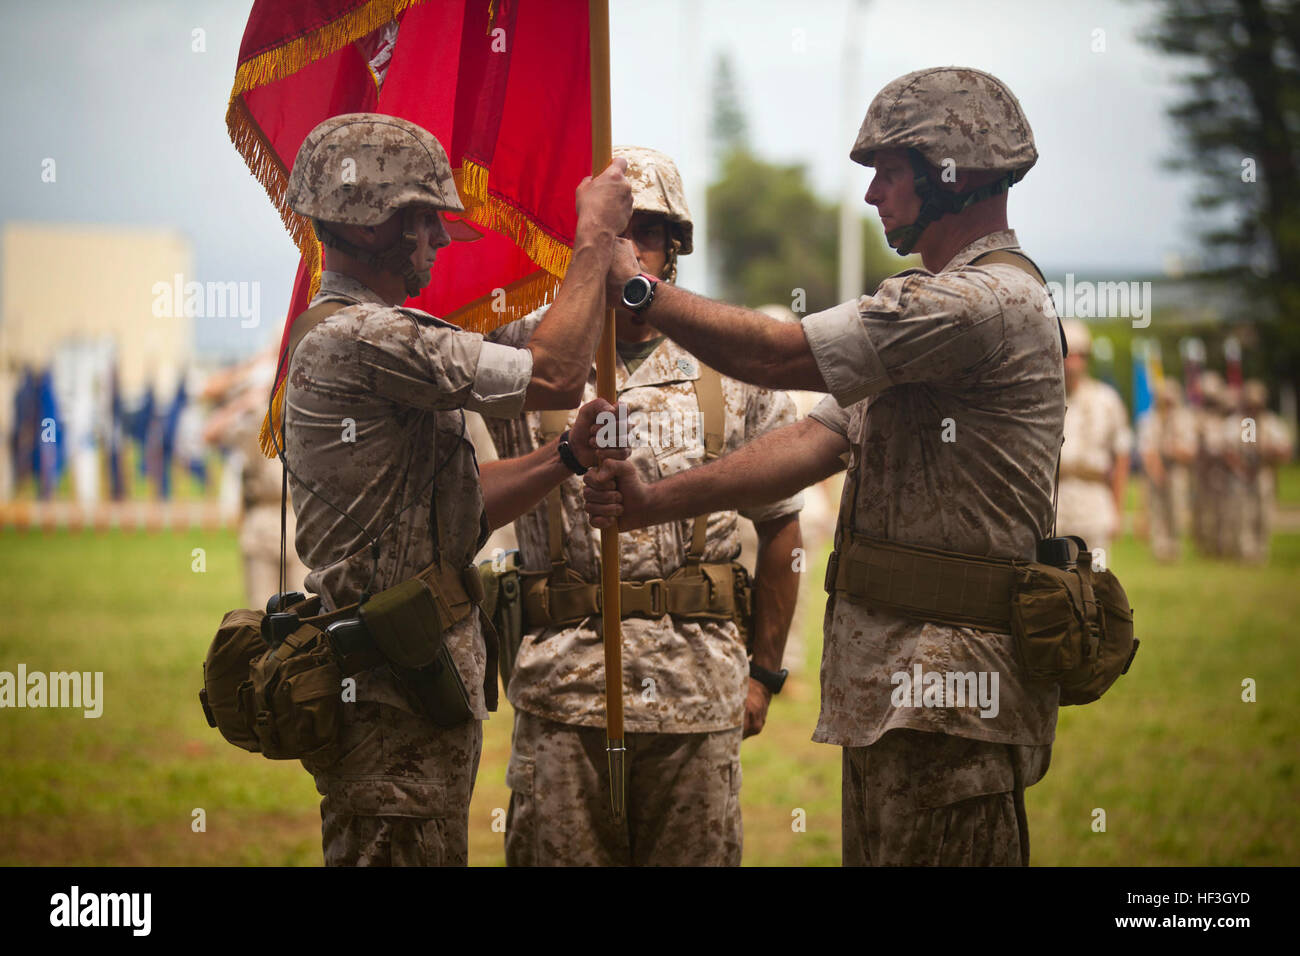 U.S. Marine Corps Col. Timothy E. Winand (right), outgoing 3rd Marine Regiment commanding officer, delivers the regimental colors to Lt. Col. Carl E. Cooper Jr. (left) during the 3rd Marine Regiment's Change of Command Ceremony at Dewey Square aboard Marine Corps Base Hawaii (MCBH), Kaneohe Bay, July 17, 2015. (U.S. Marine Corps photo by Lance Cpl. Aaron S. Patterson, MCBH Combat Camera/Released) 3D Marine Regiment Change of Command Ceremony 2015 150717-M-QH615-059 Stock Photo